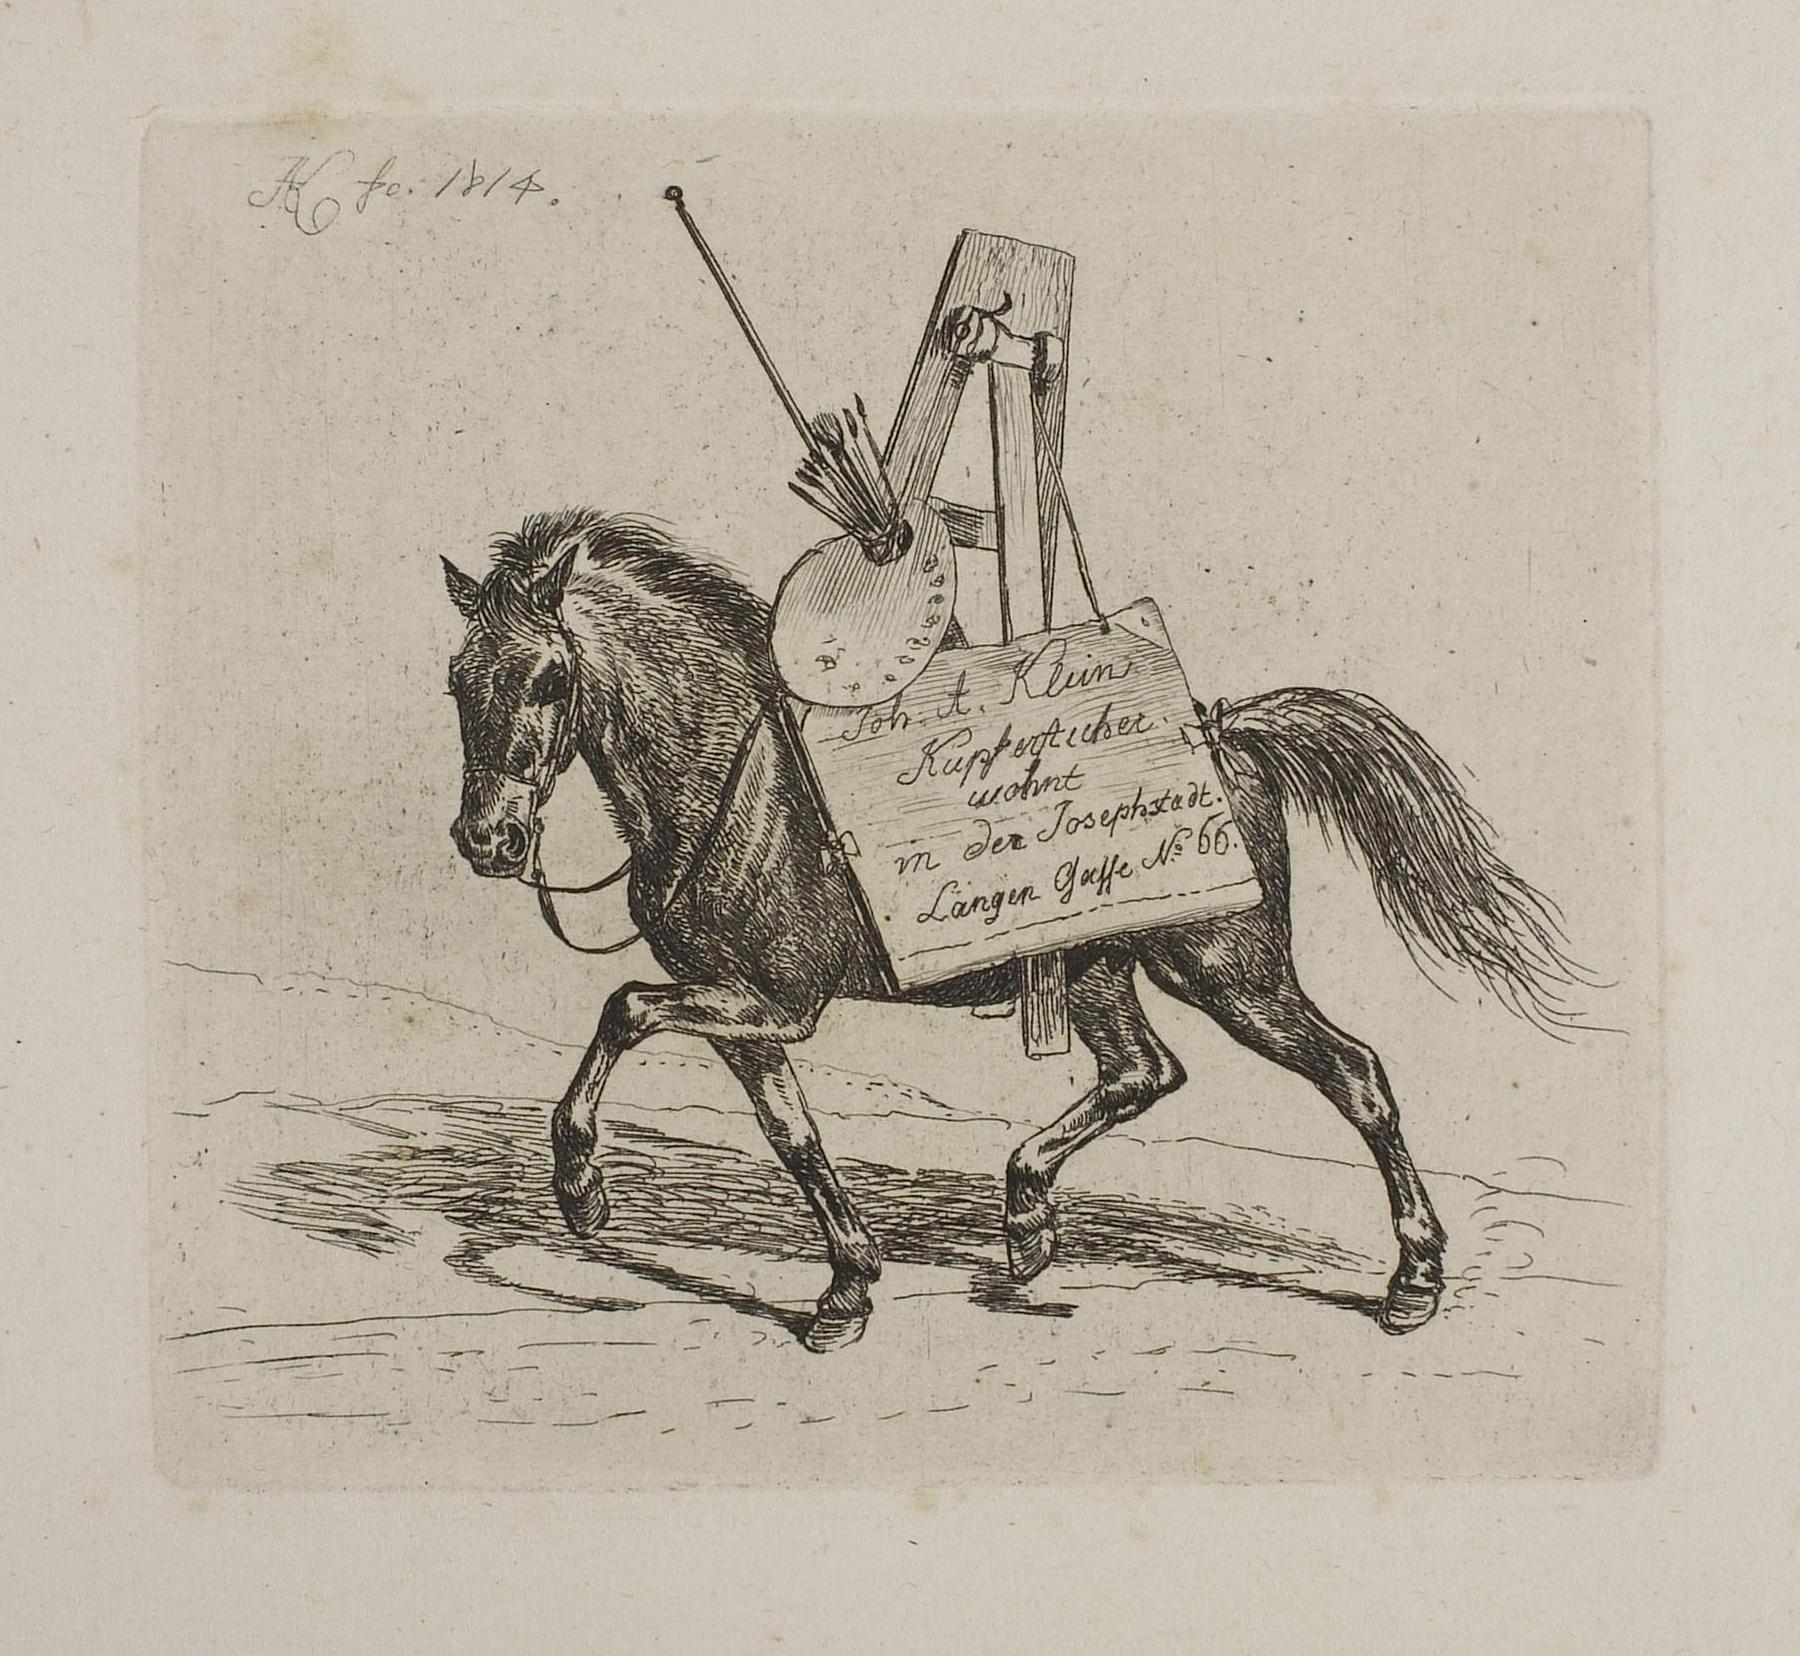 Horse Loaded with Painting Tools and Portfolio with Klein's Adress, E670